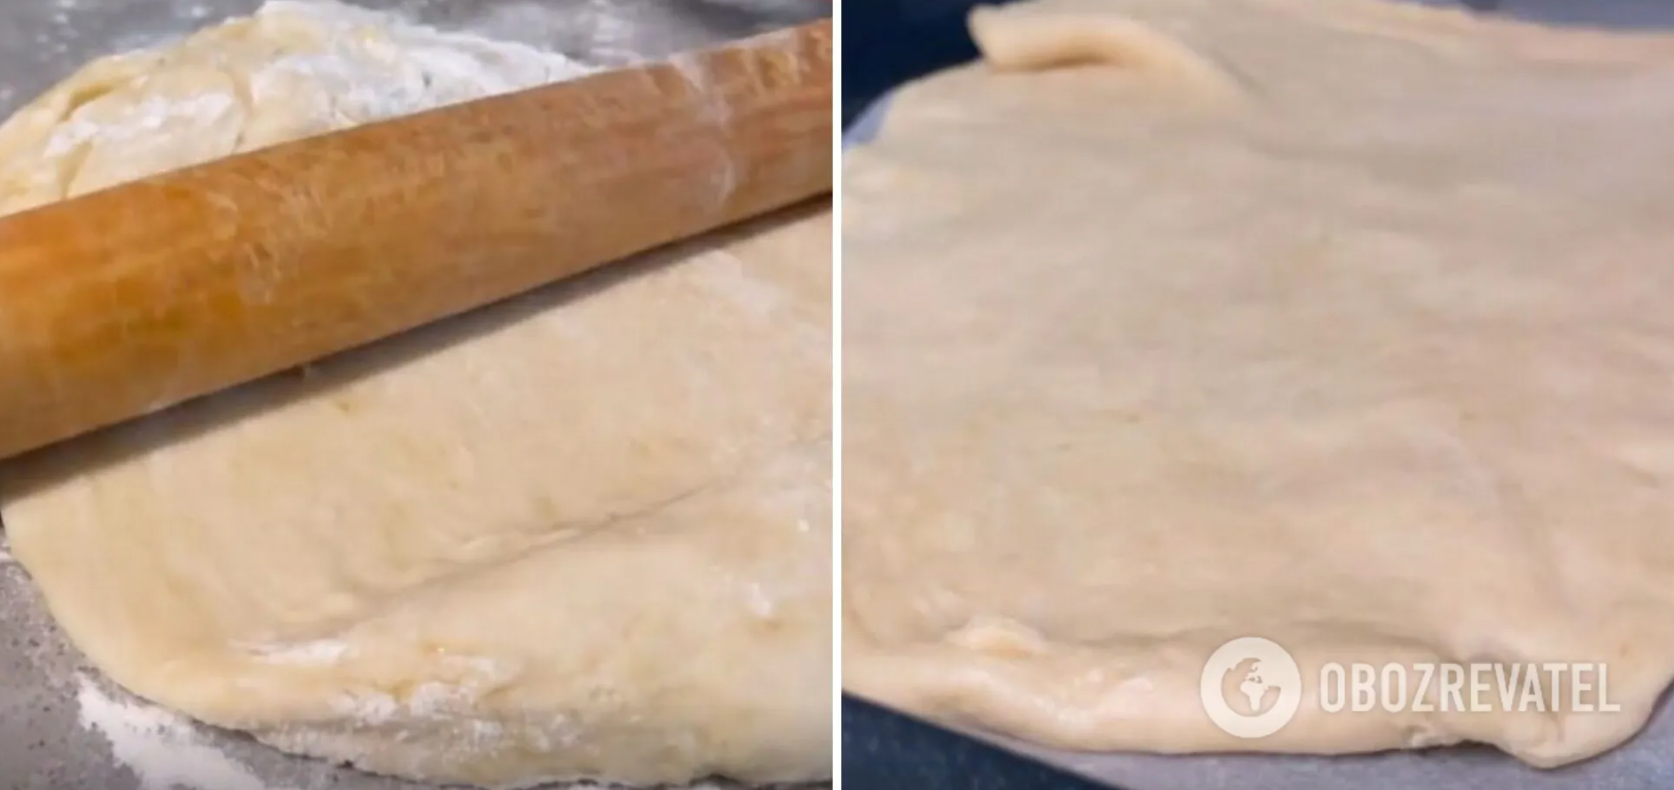 Baking dough without eggs, butter or milk